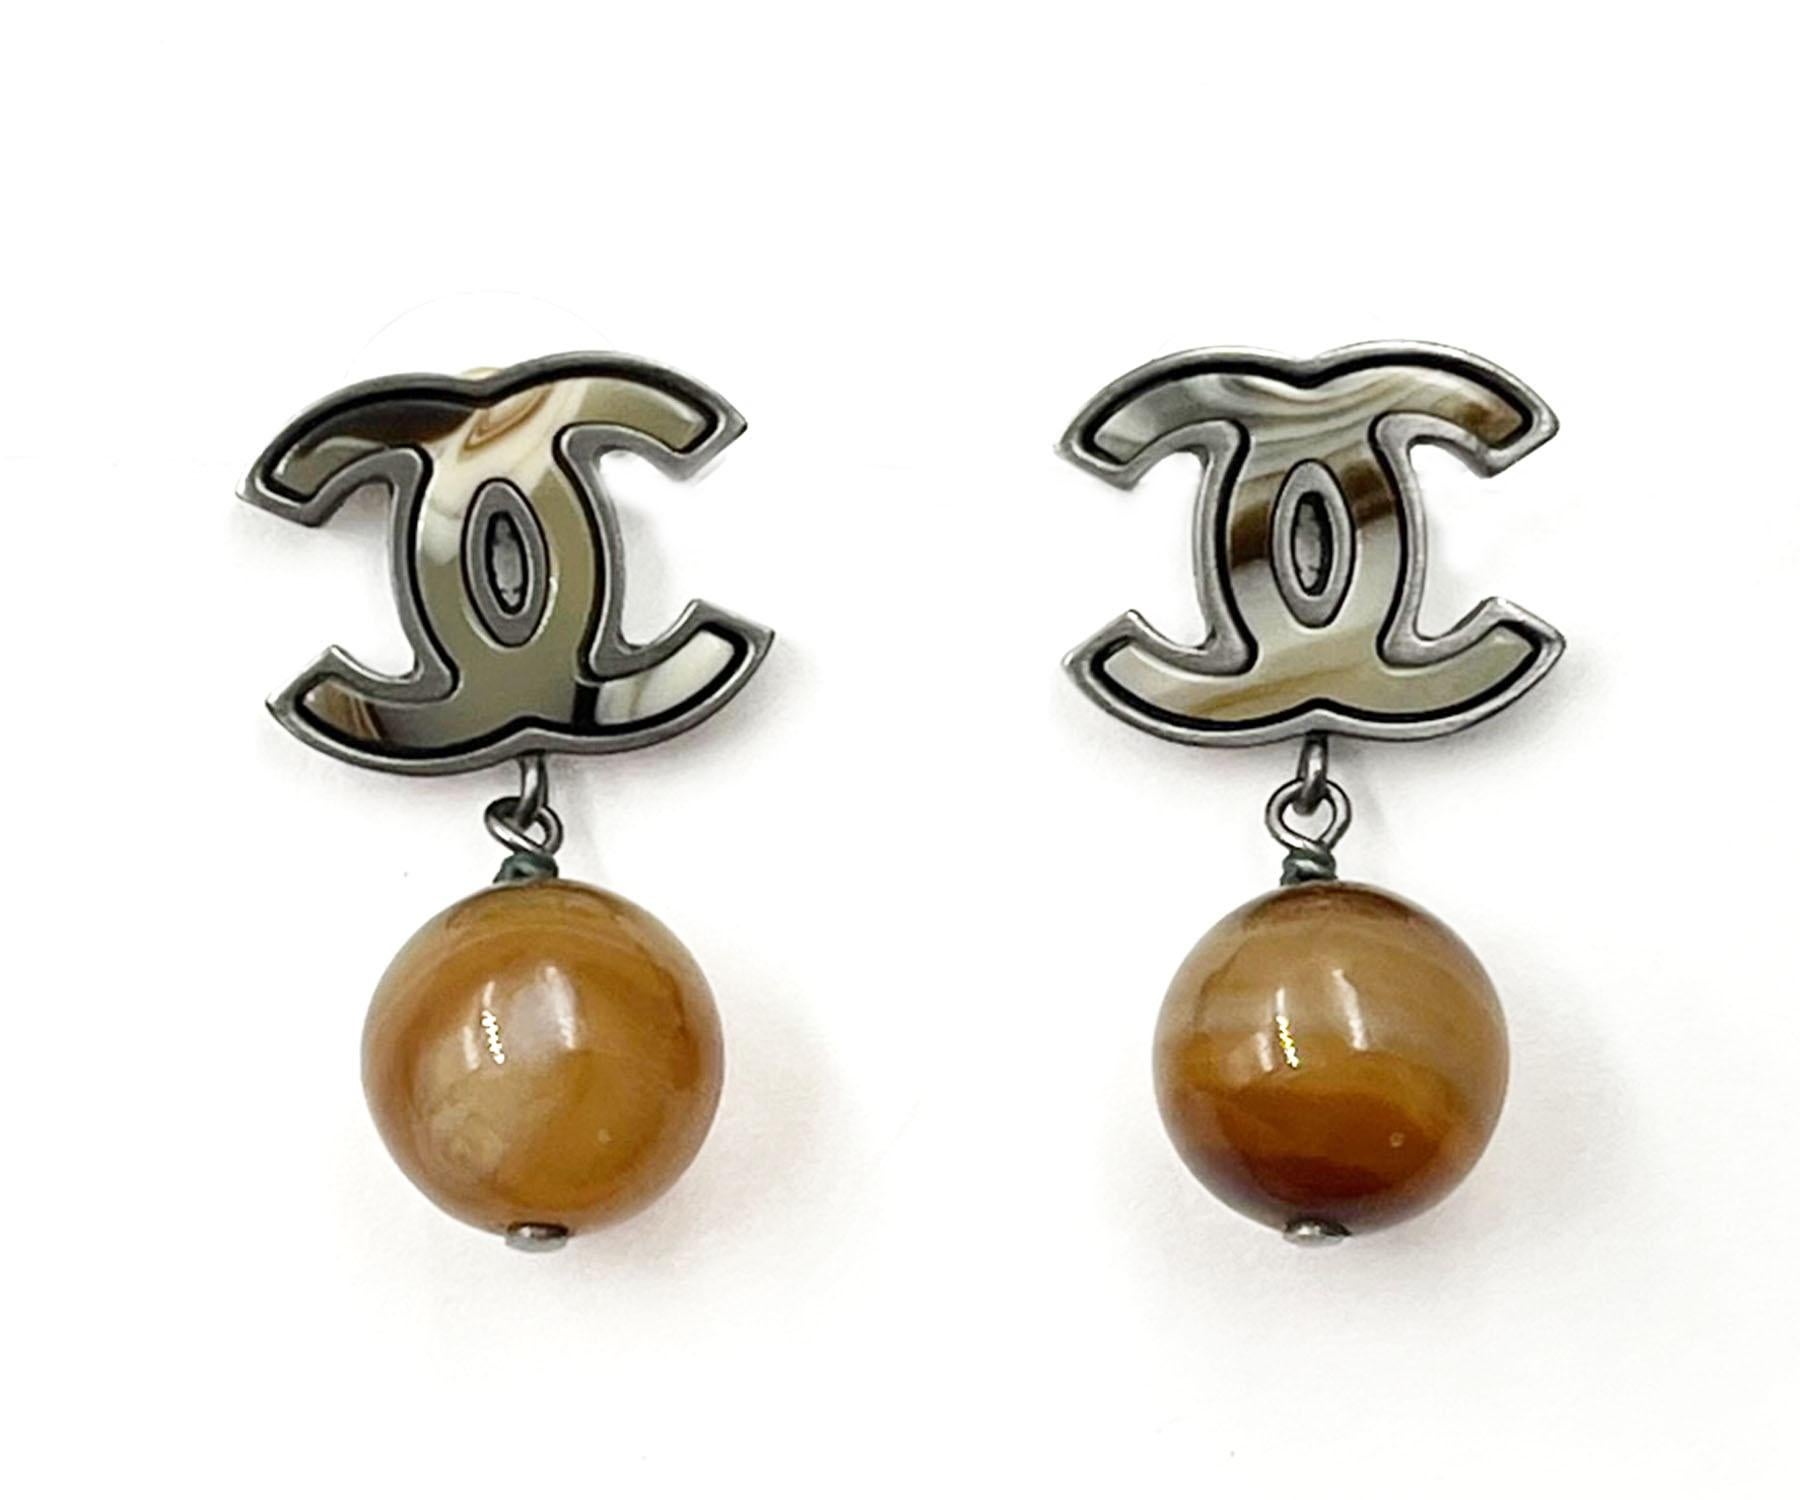 Chanel Silver CC Petrified Wood CC Dangle Piercing Earrings

*Marked 10
*Made in Italy
*Comes with the original box 

-It is approximately 1.25